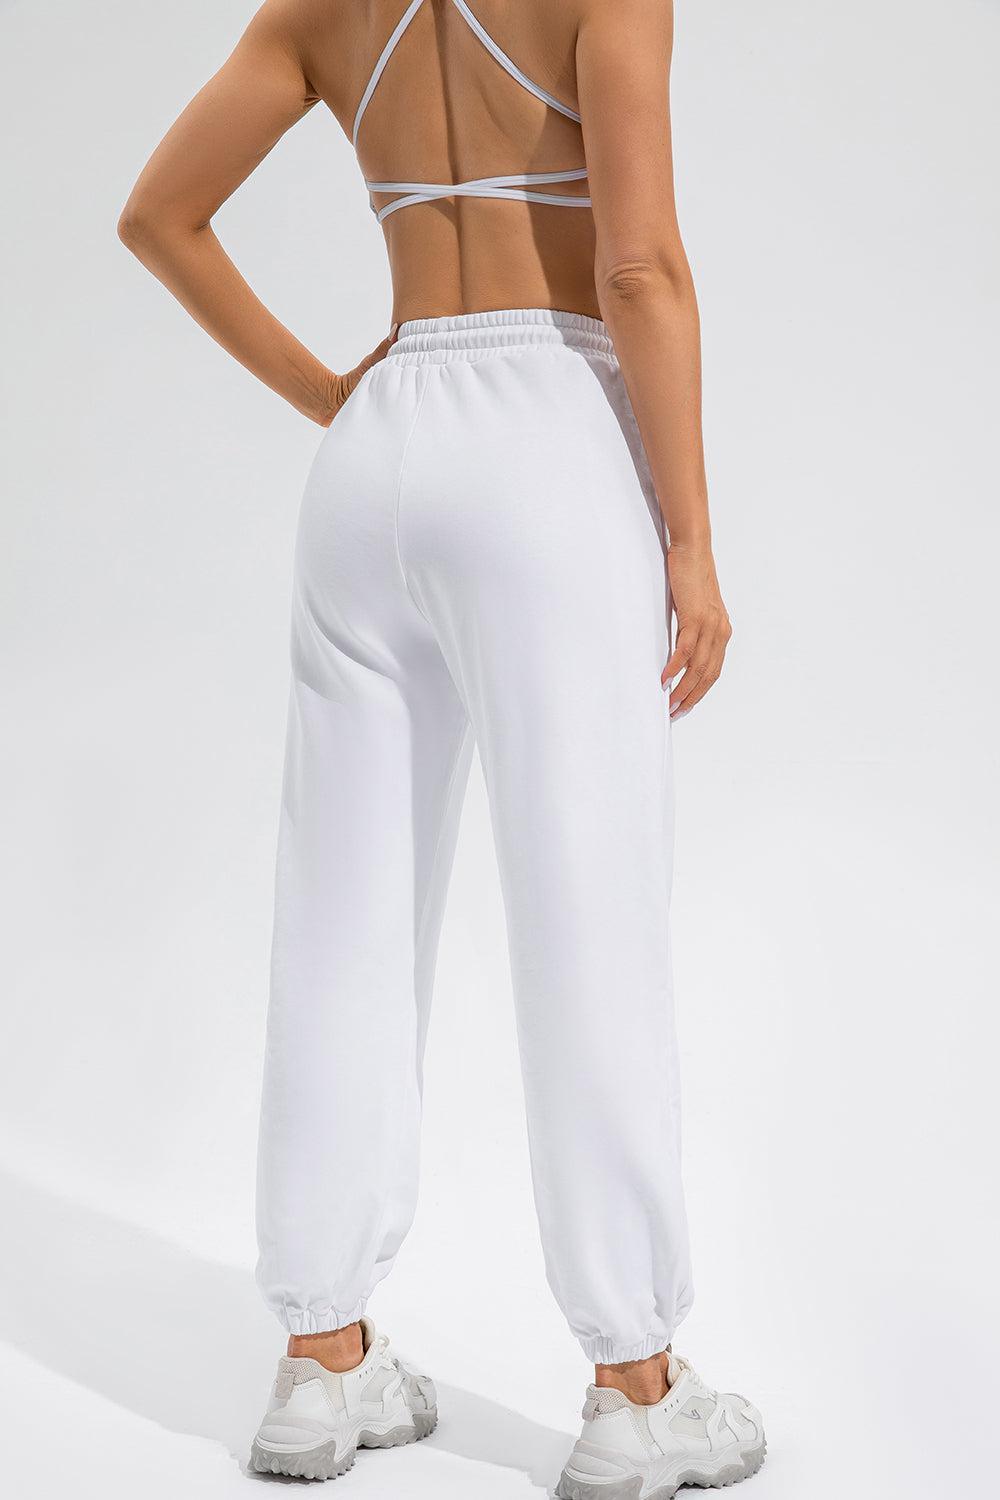 a woman in white pants and a bra top